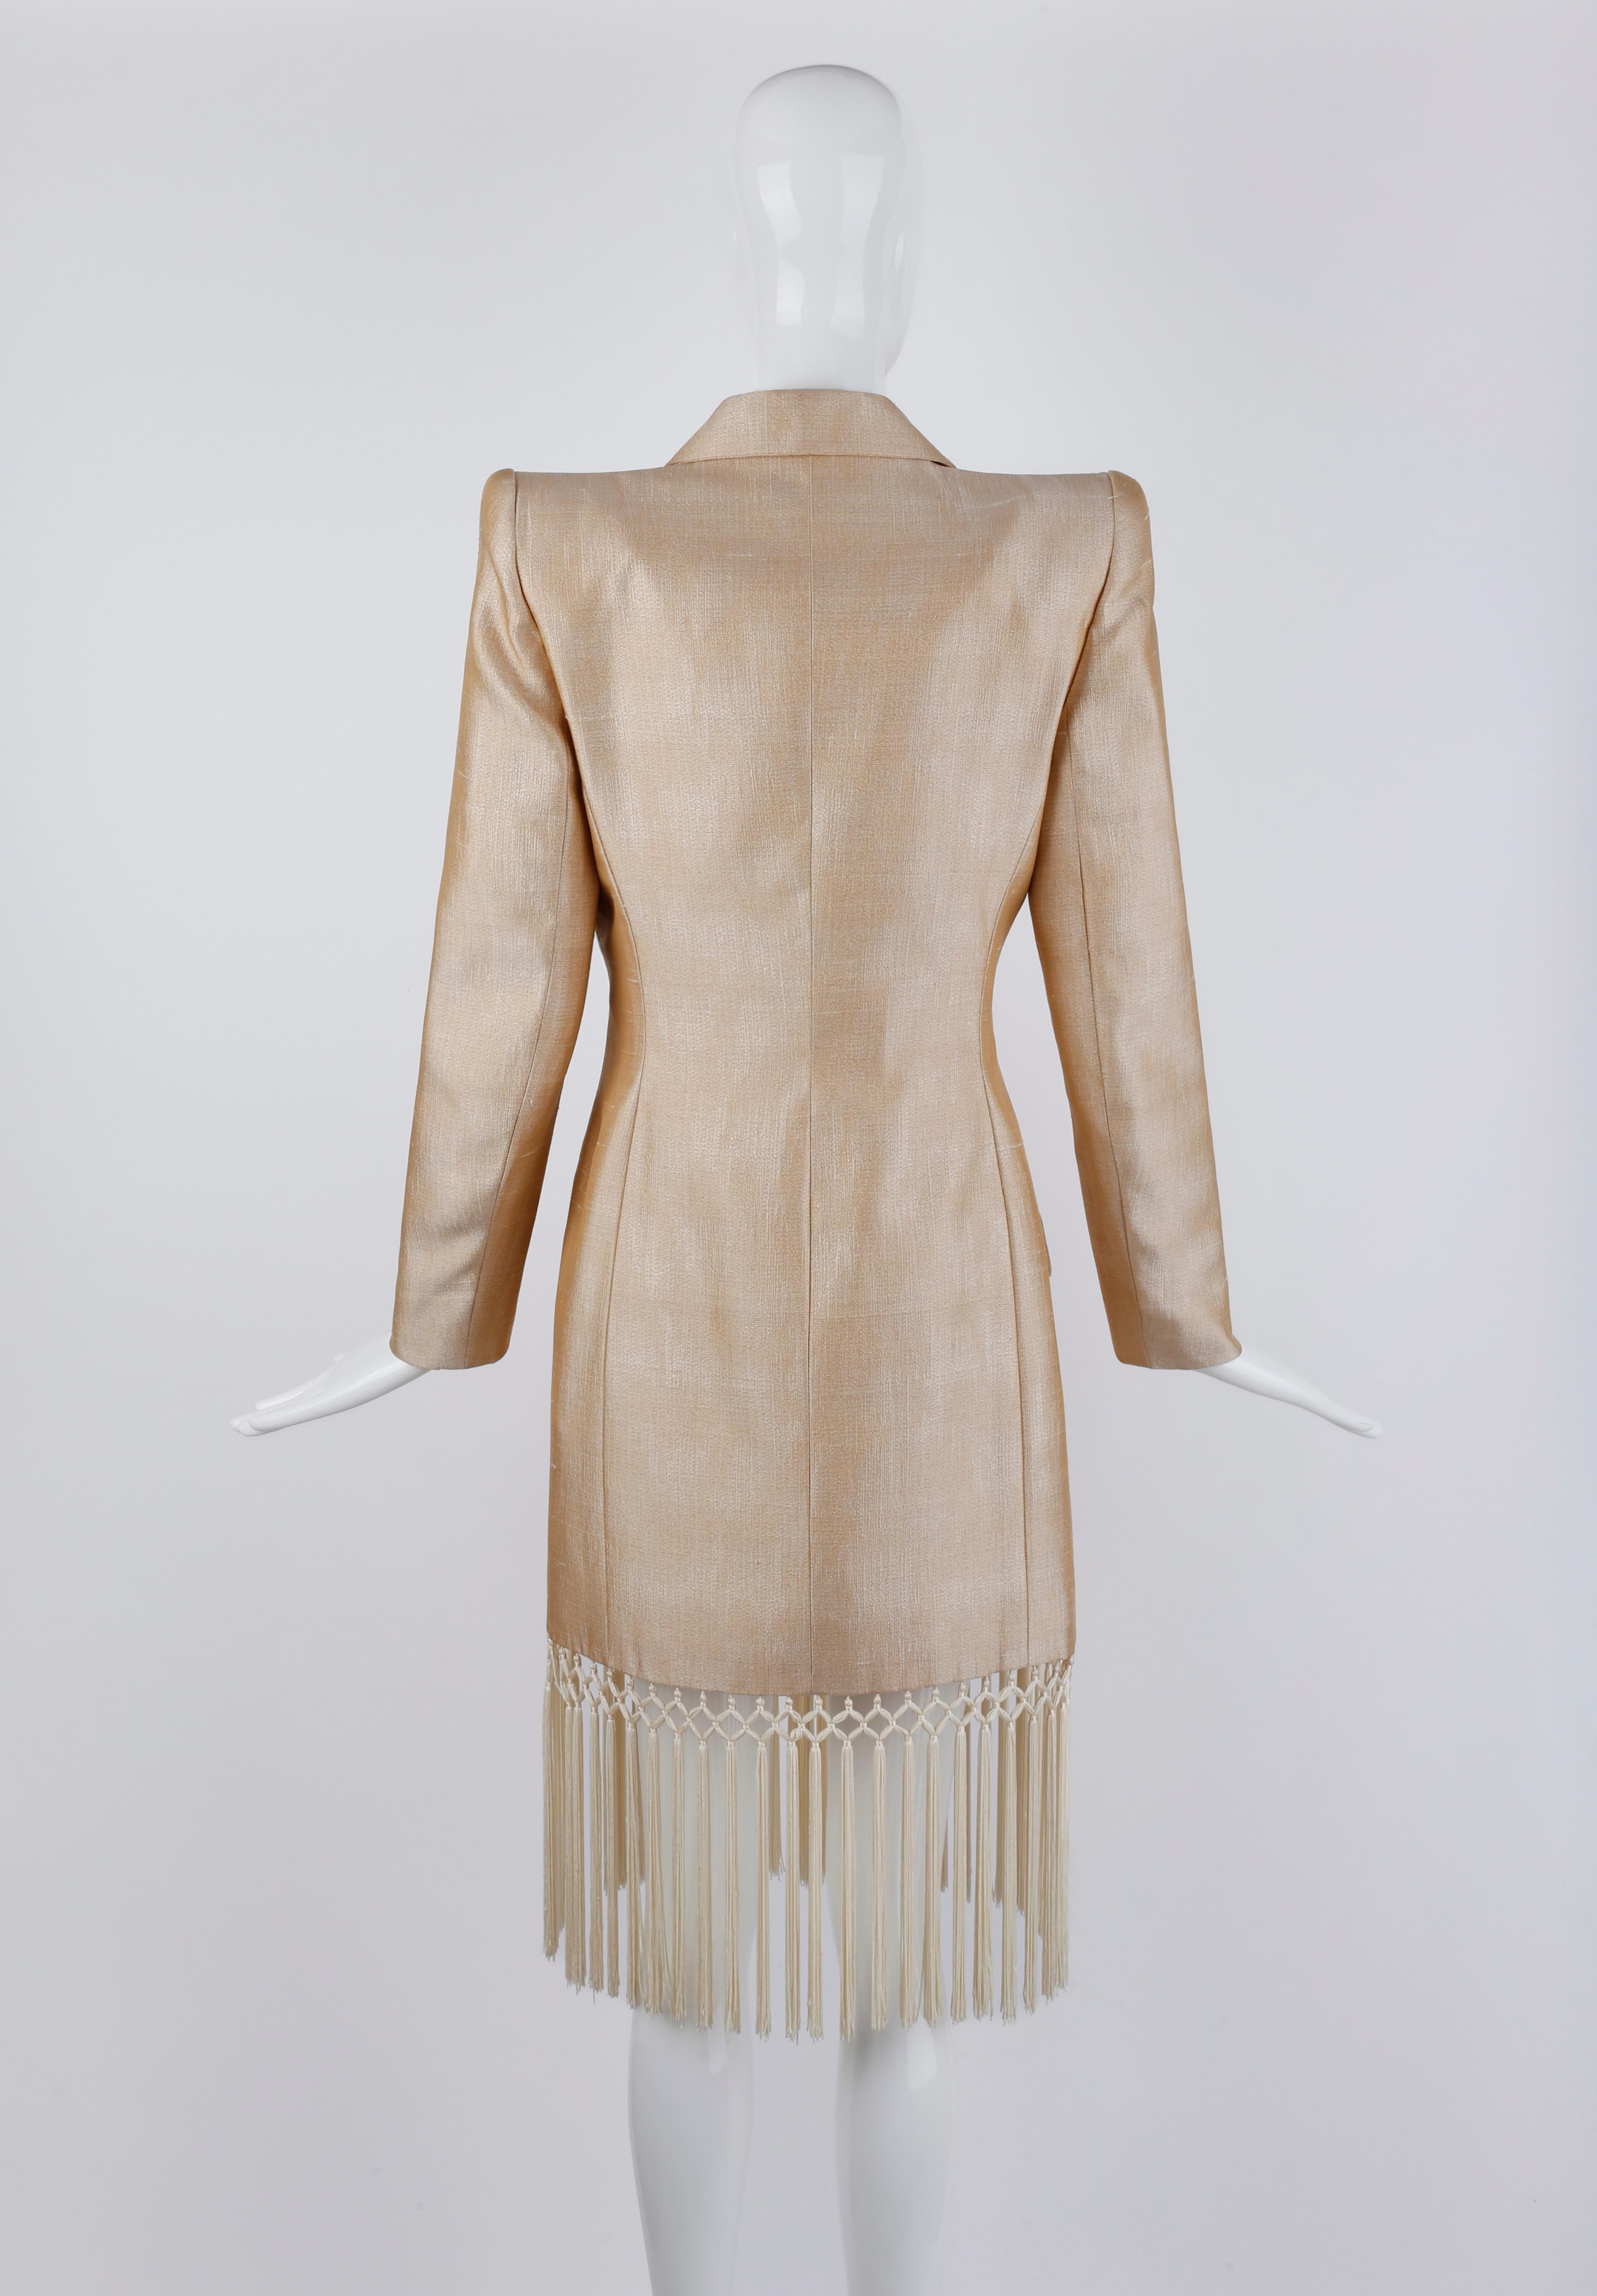 Givenchy Couture Alexander McQueen S/S 1998 Champagne Silk Tassel Dress Coat For Sale 2